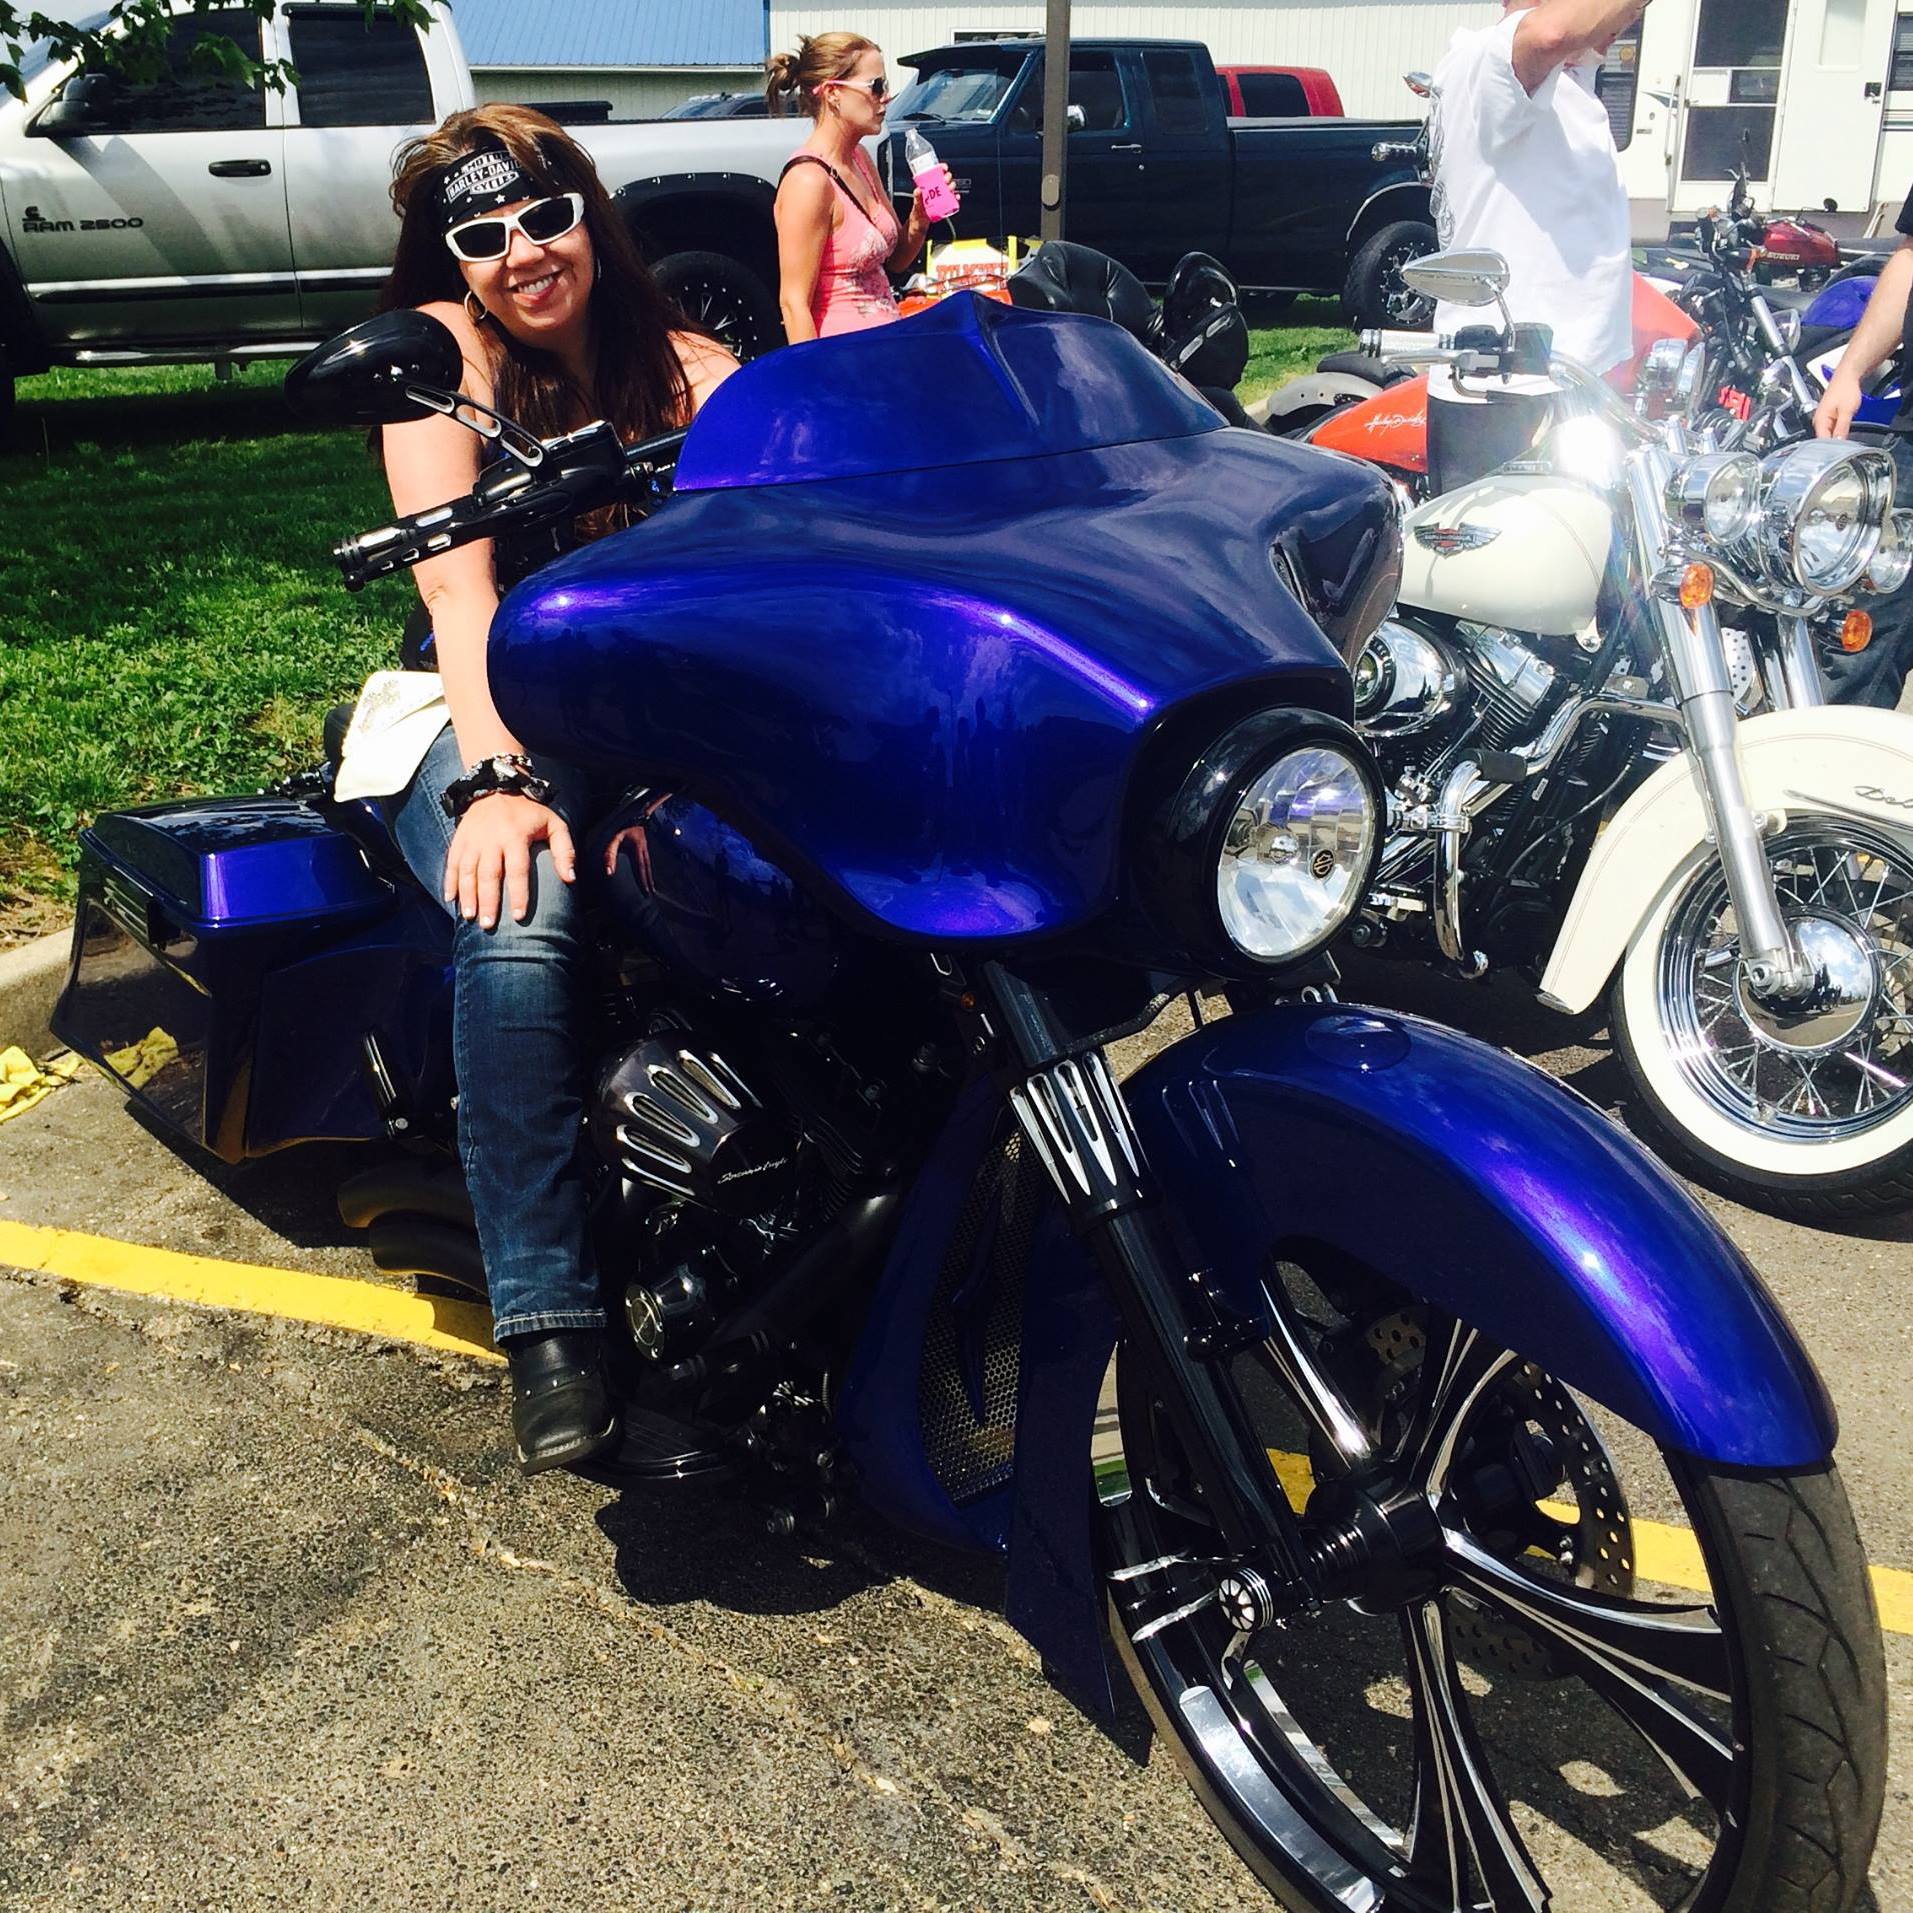 Kelly Starr on her motorcycle.